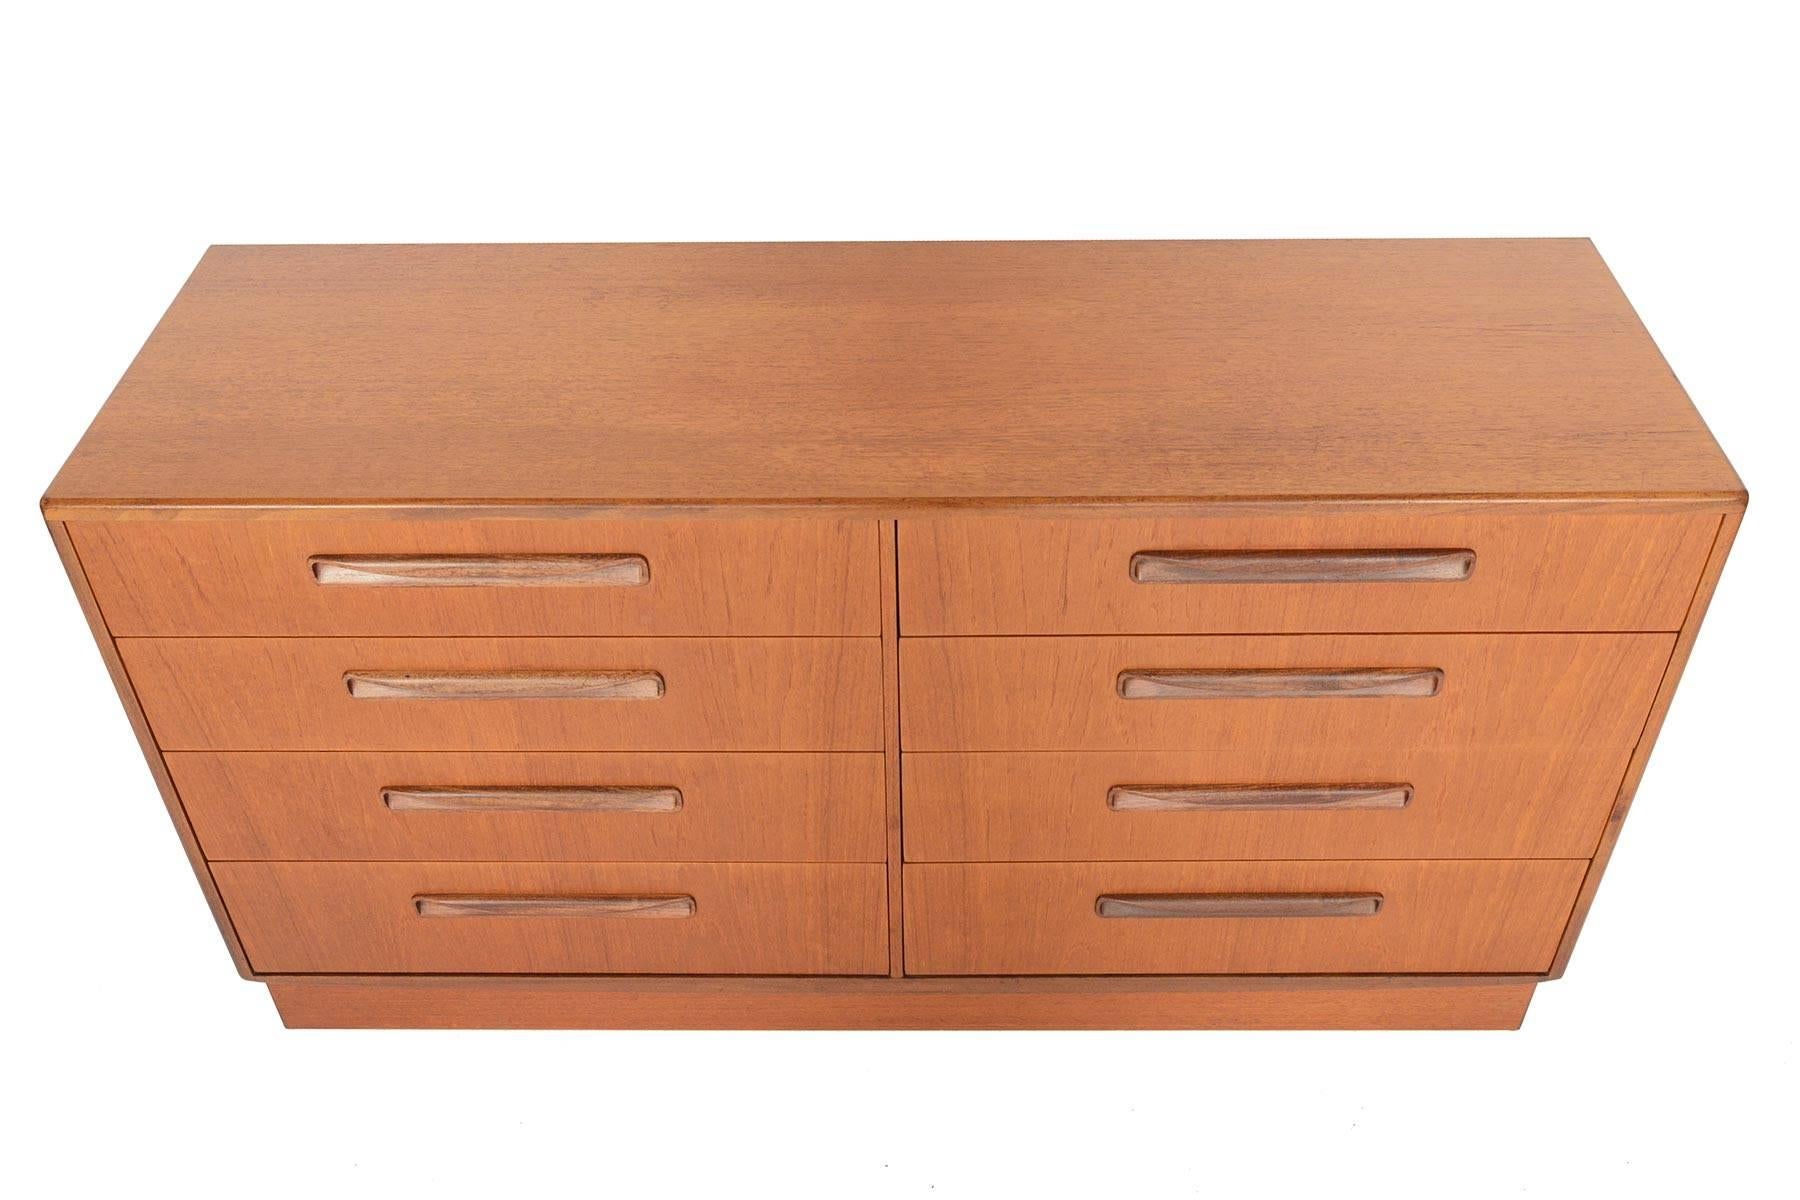 English modern G Plan Fresco double dresser. Designed by Victor Wilkins in the 1960s, this fantastic dresser features eight deep drawers with solid teak drawer fronts carved afromosia pulls. With its low design, this piece is perfect for any space.